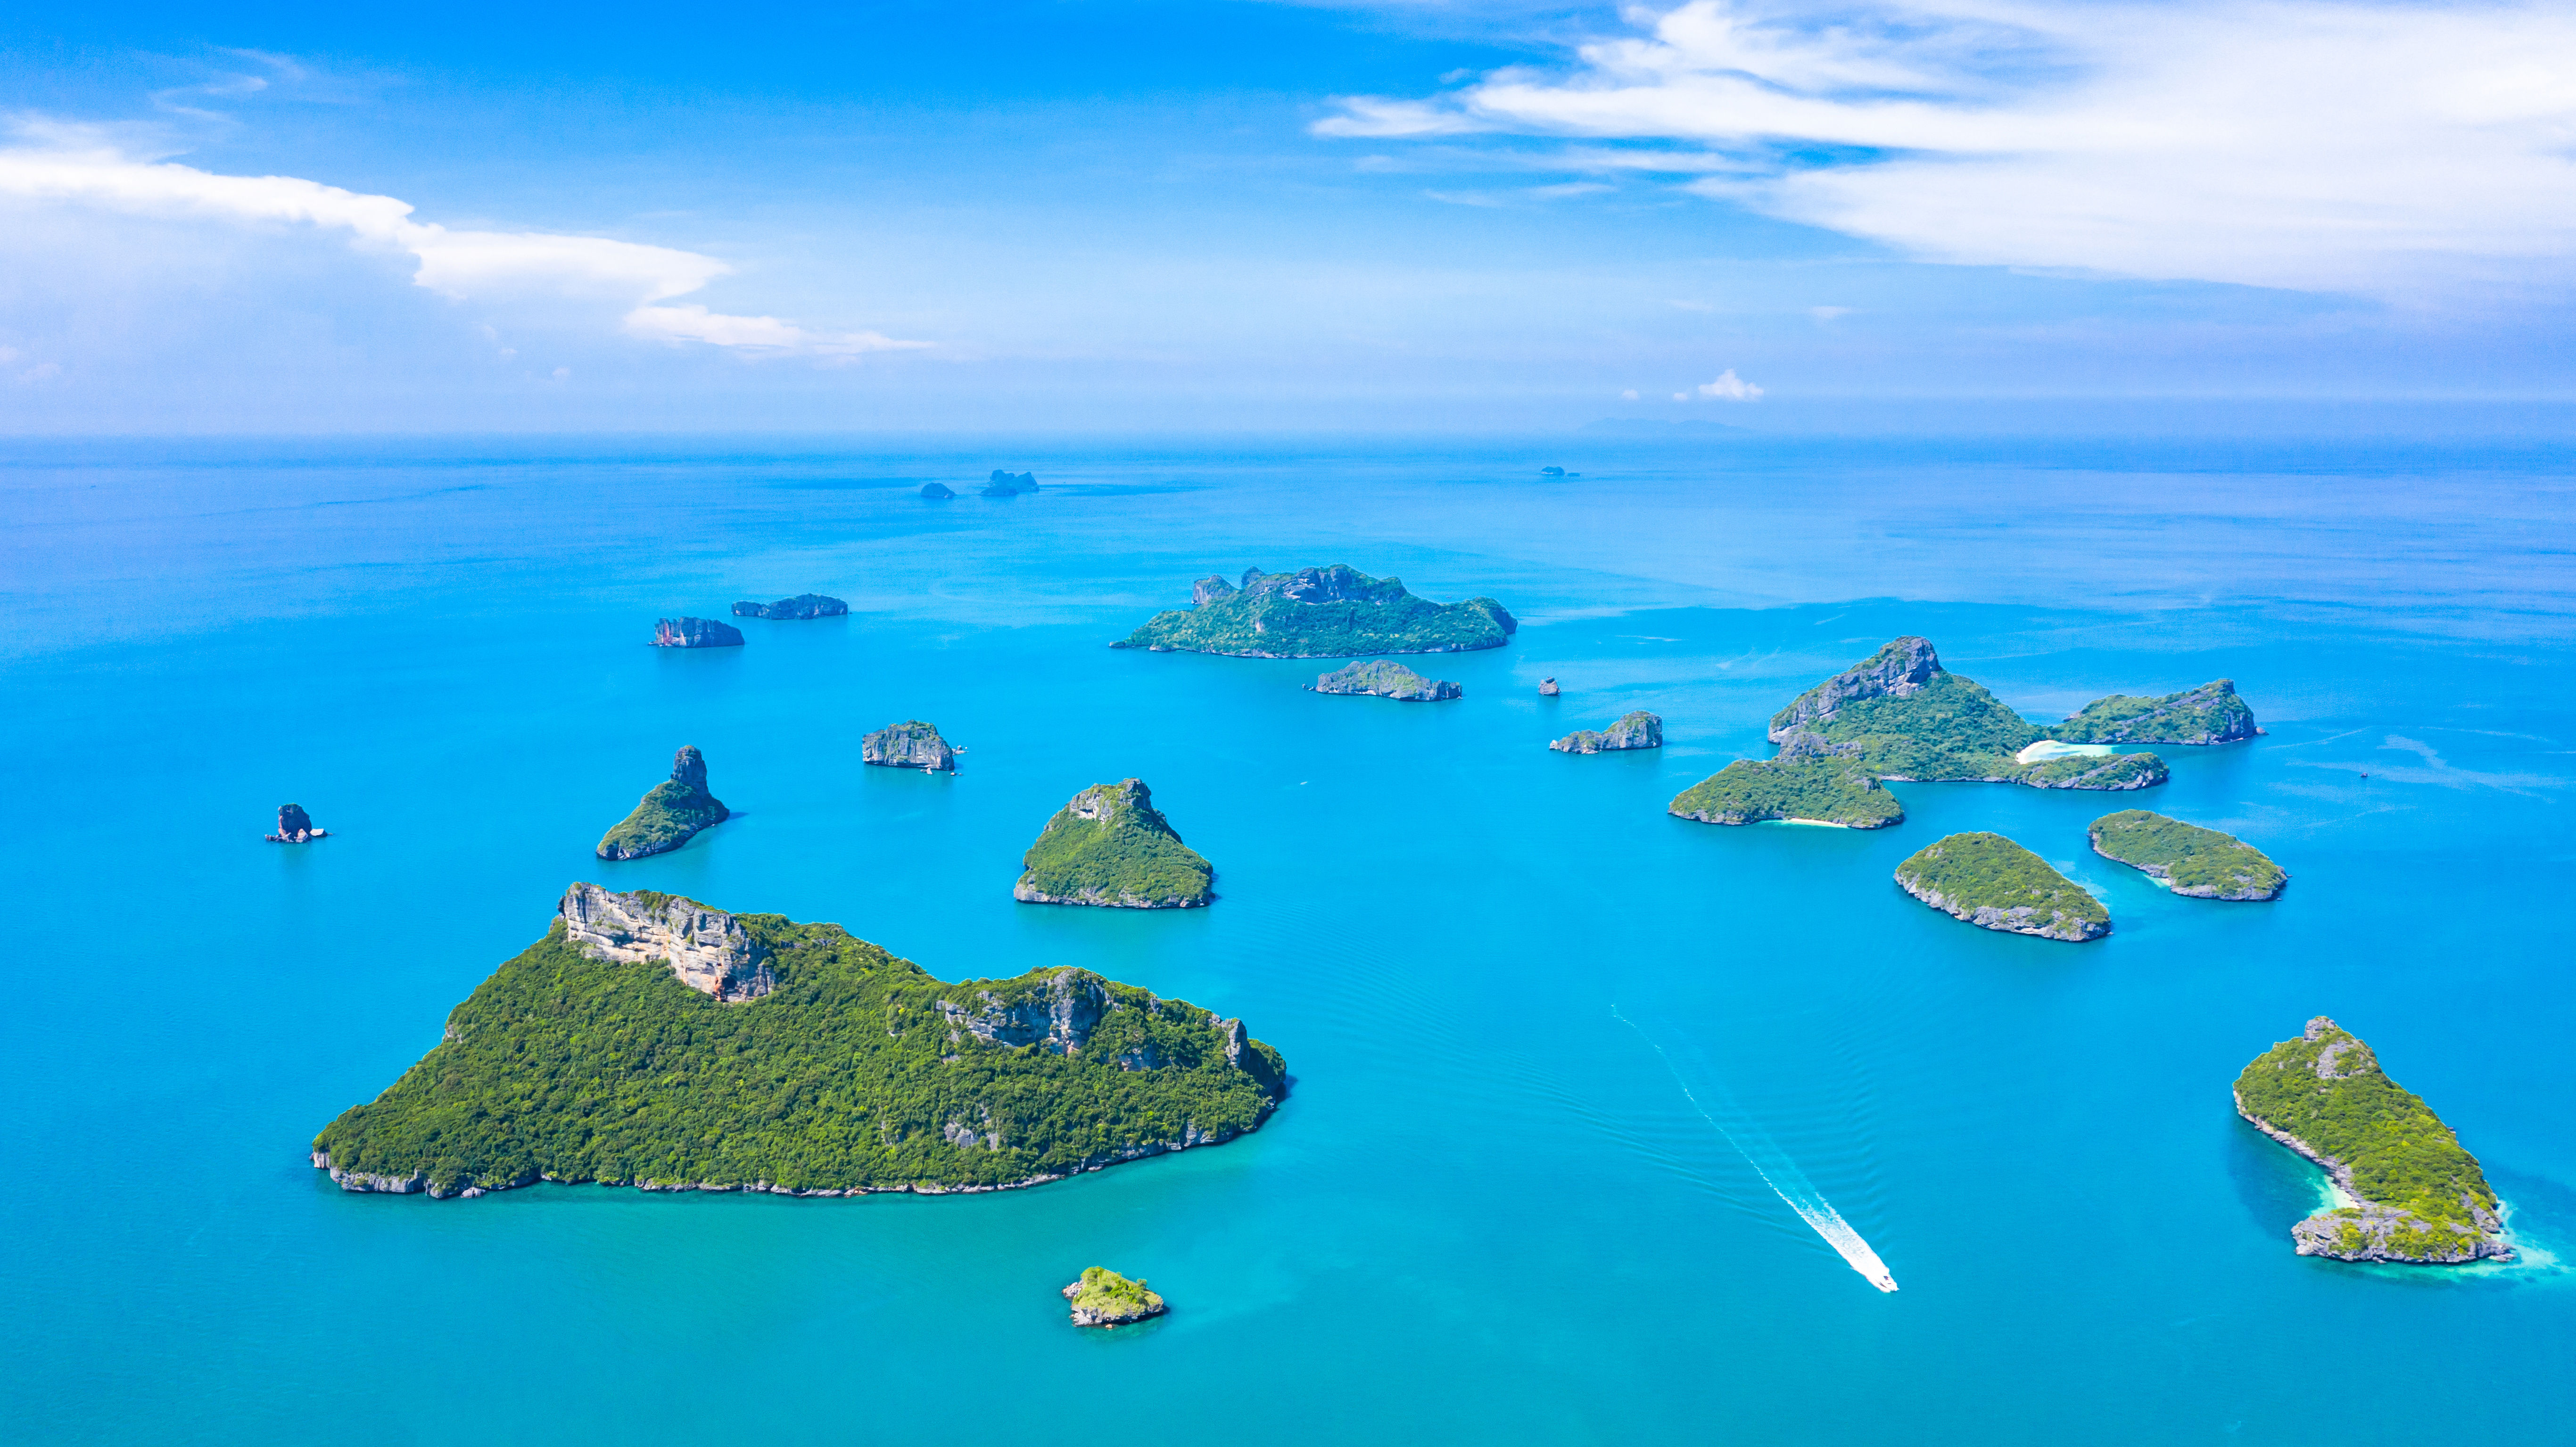 Aerial view of Ang Thong National Marine Park islands and boats in Surat Thani, Thailand.